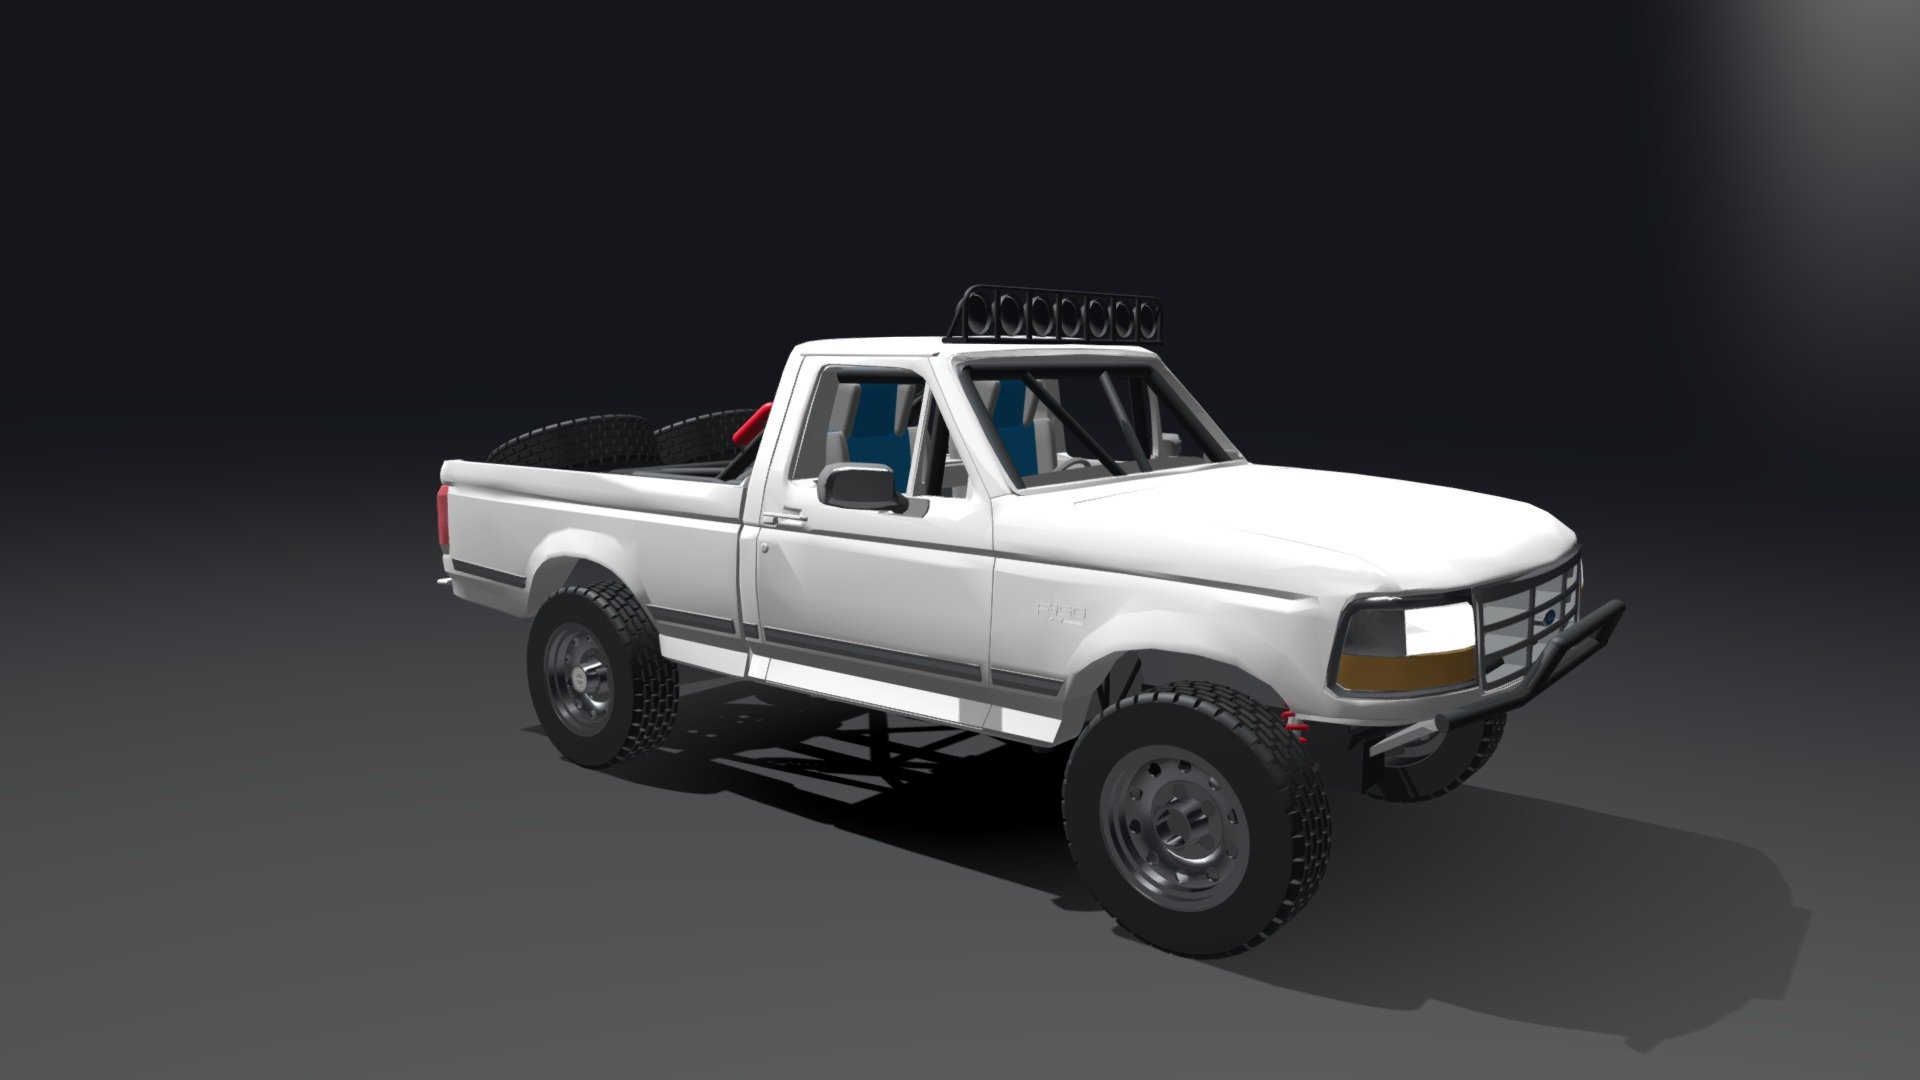 This was modeled in tinkercad. My acount is 
(Moto Man 135). I am new to here, so comment any tips you have. thank you! - '95 Ford F-150 prerunner baja truck - Download Free 3D model by moto man 135 (@csharp122705) 3d model